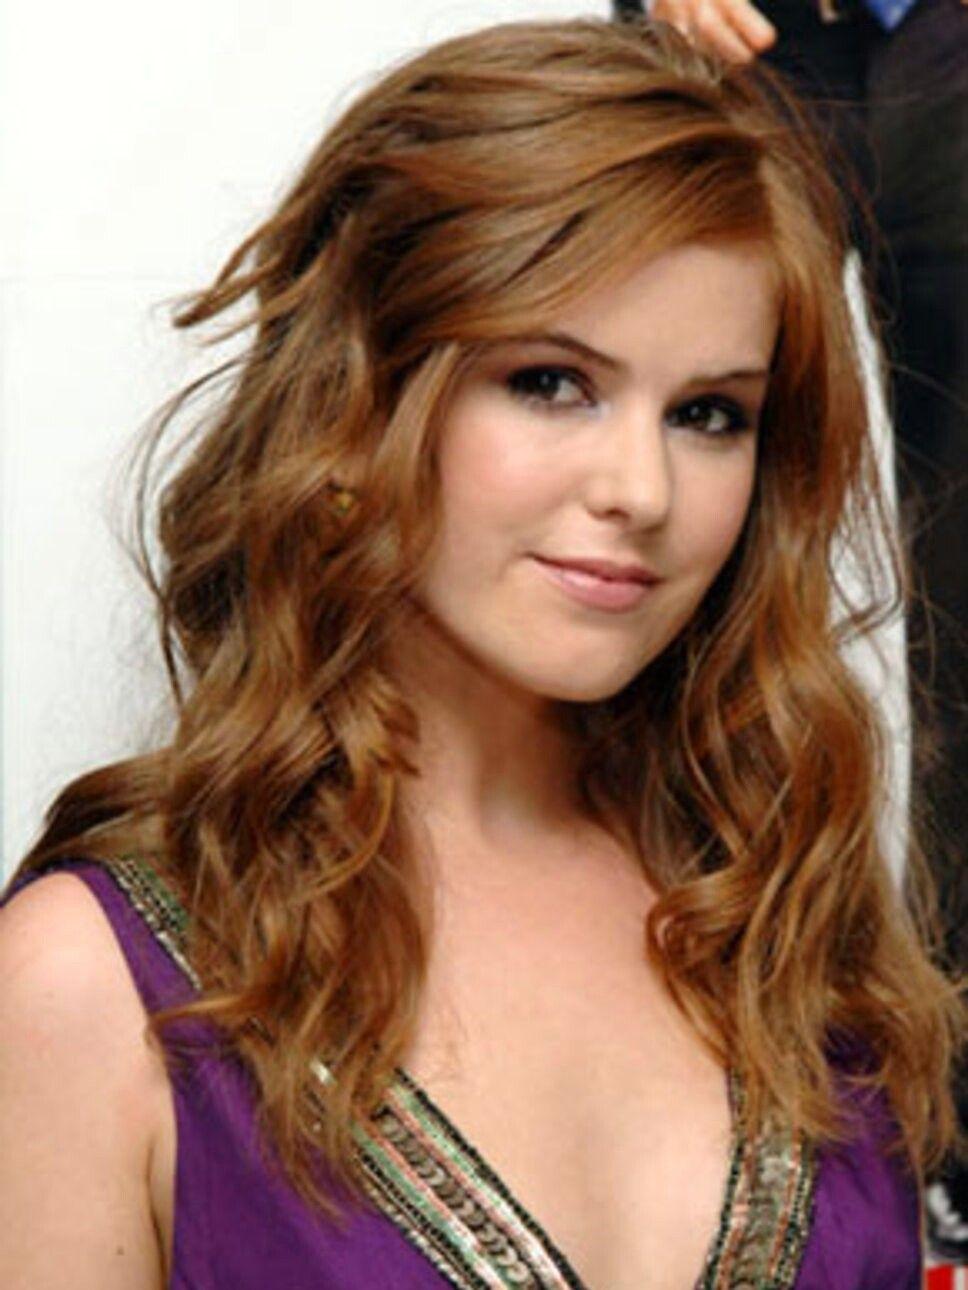 Isla fisher hair color. Hair colors Idea in 2017